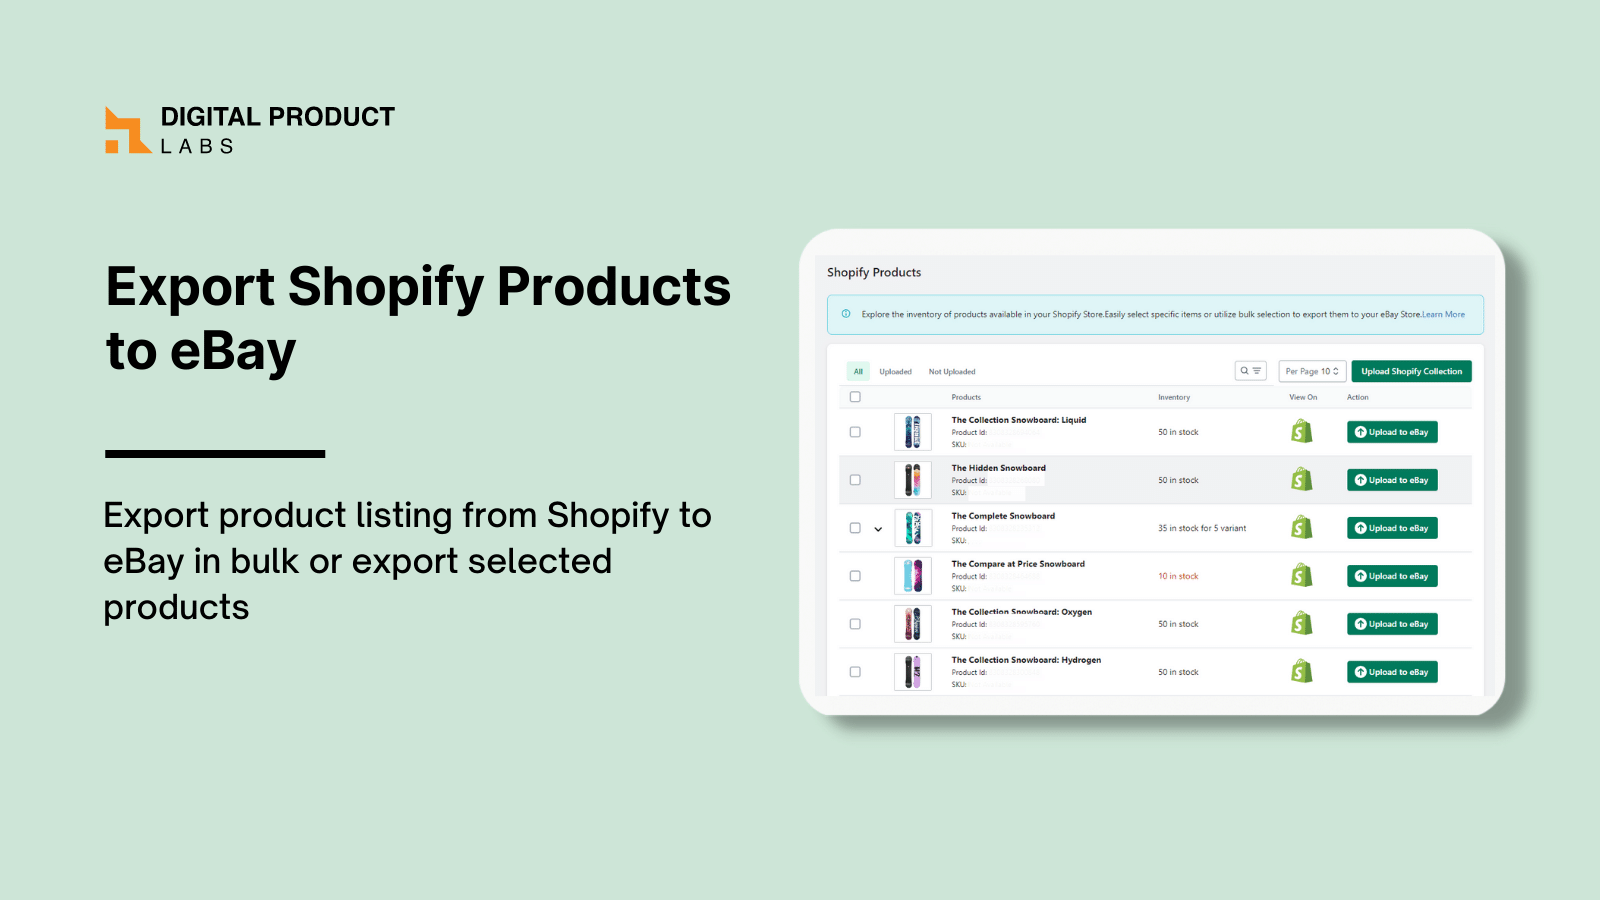 Export Shopify Products to eBay